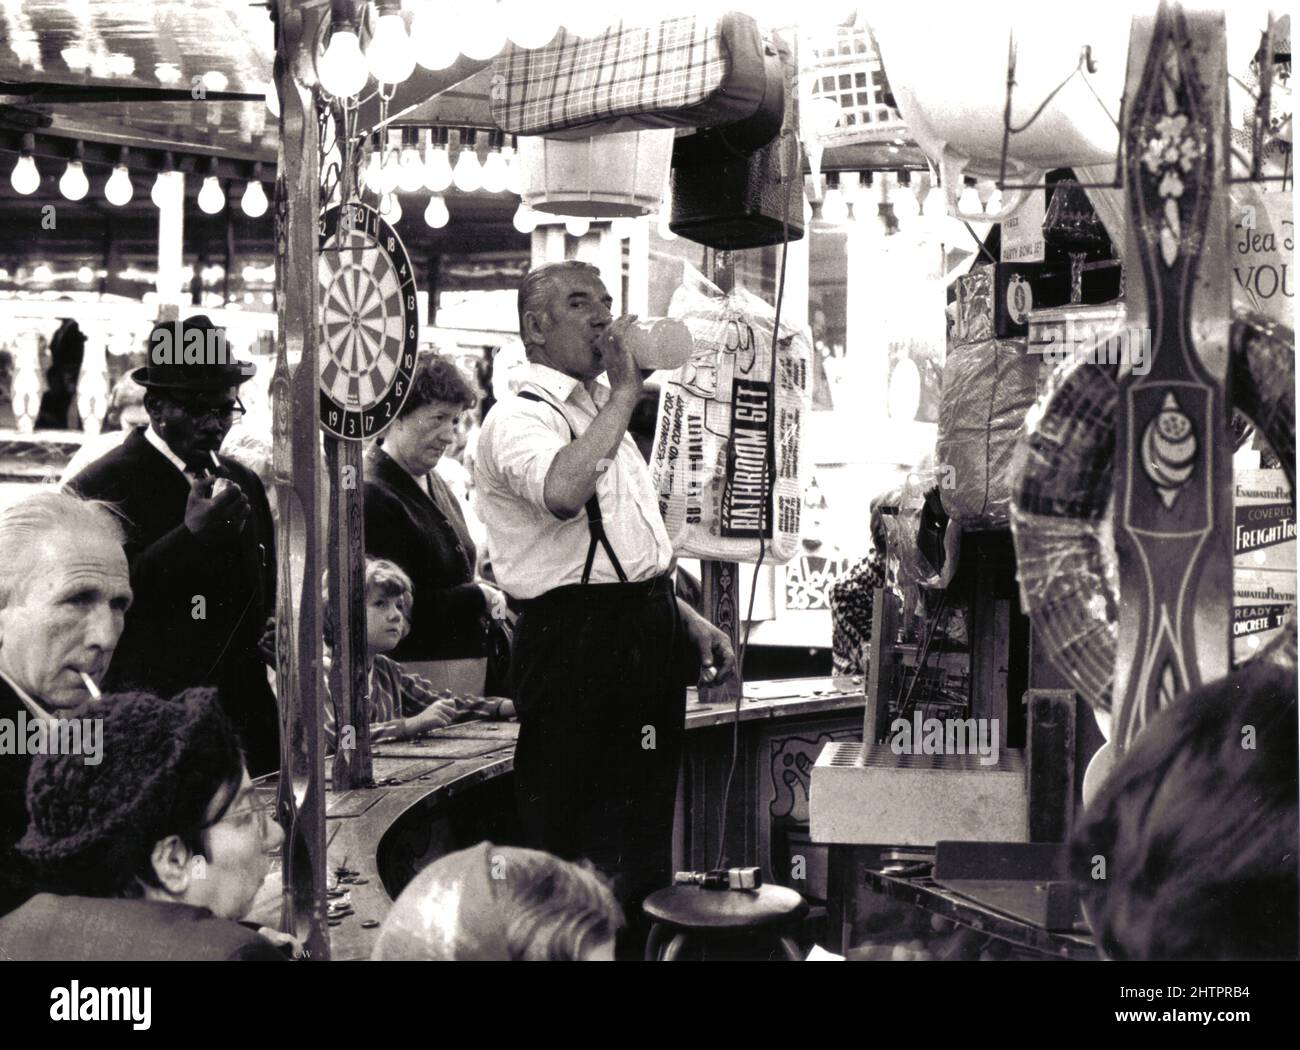 A stall holder takes a welcome drink at his typical fairground  prize bingo stall at Manningham,  Bradford, West Yorkshire, England, sometime in the early 1960's . Various prizes such as a bathroom set and dartboard can be see hanging on the circular stall supports. Stock Photo